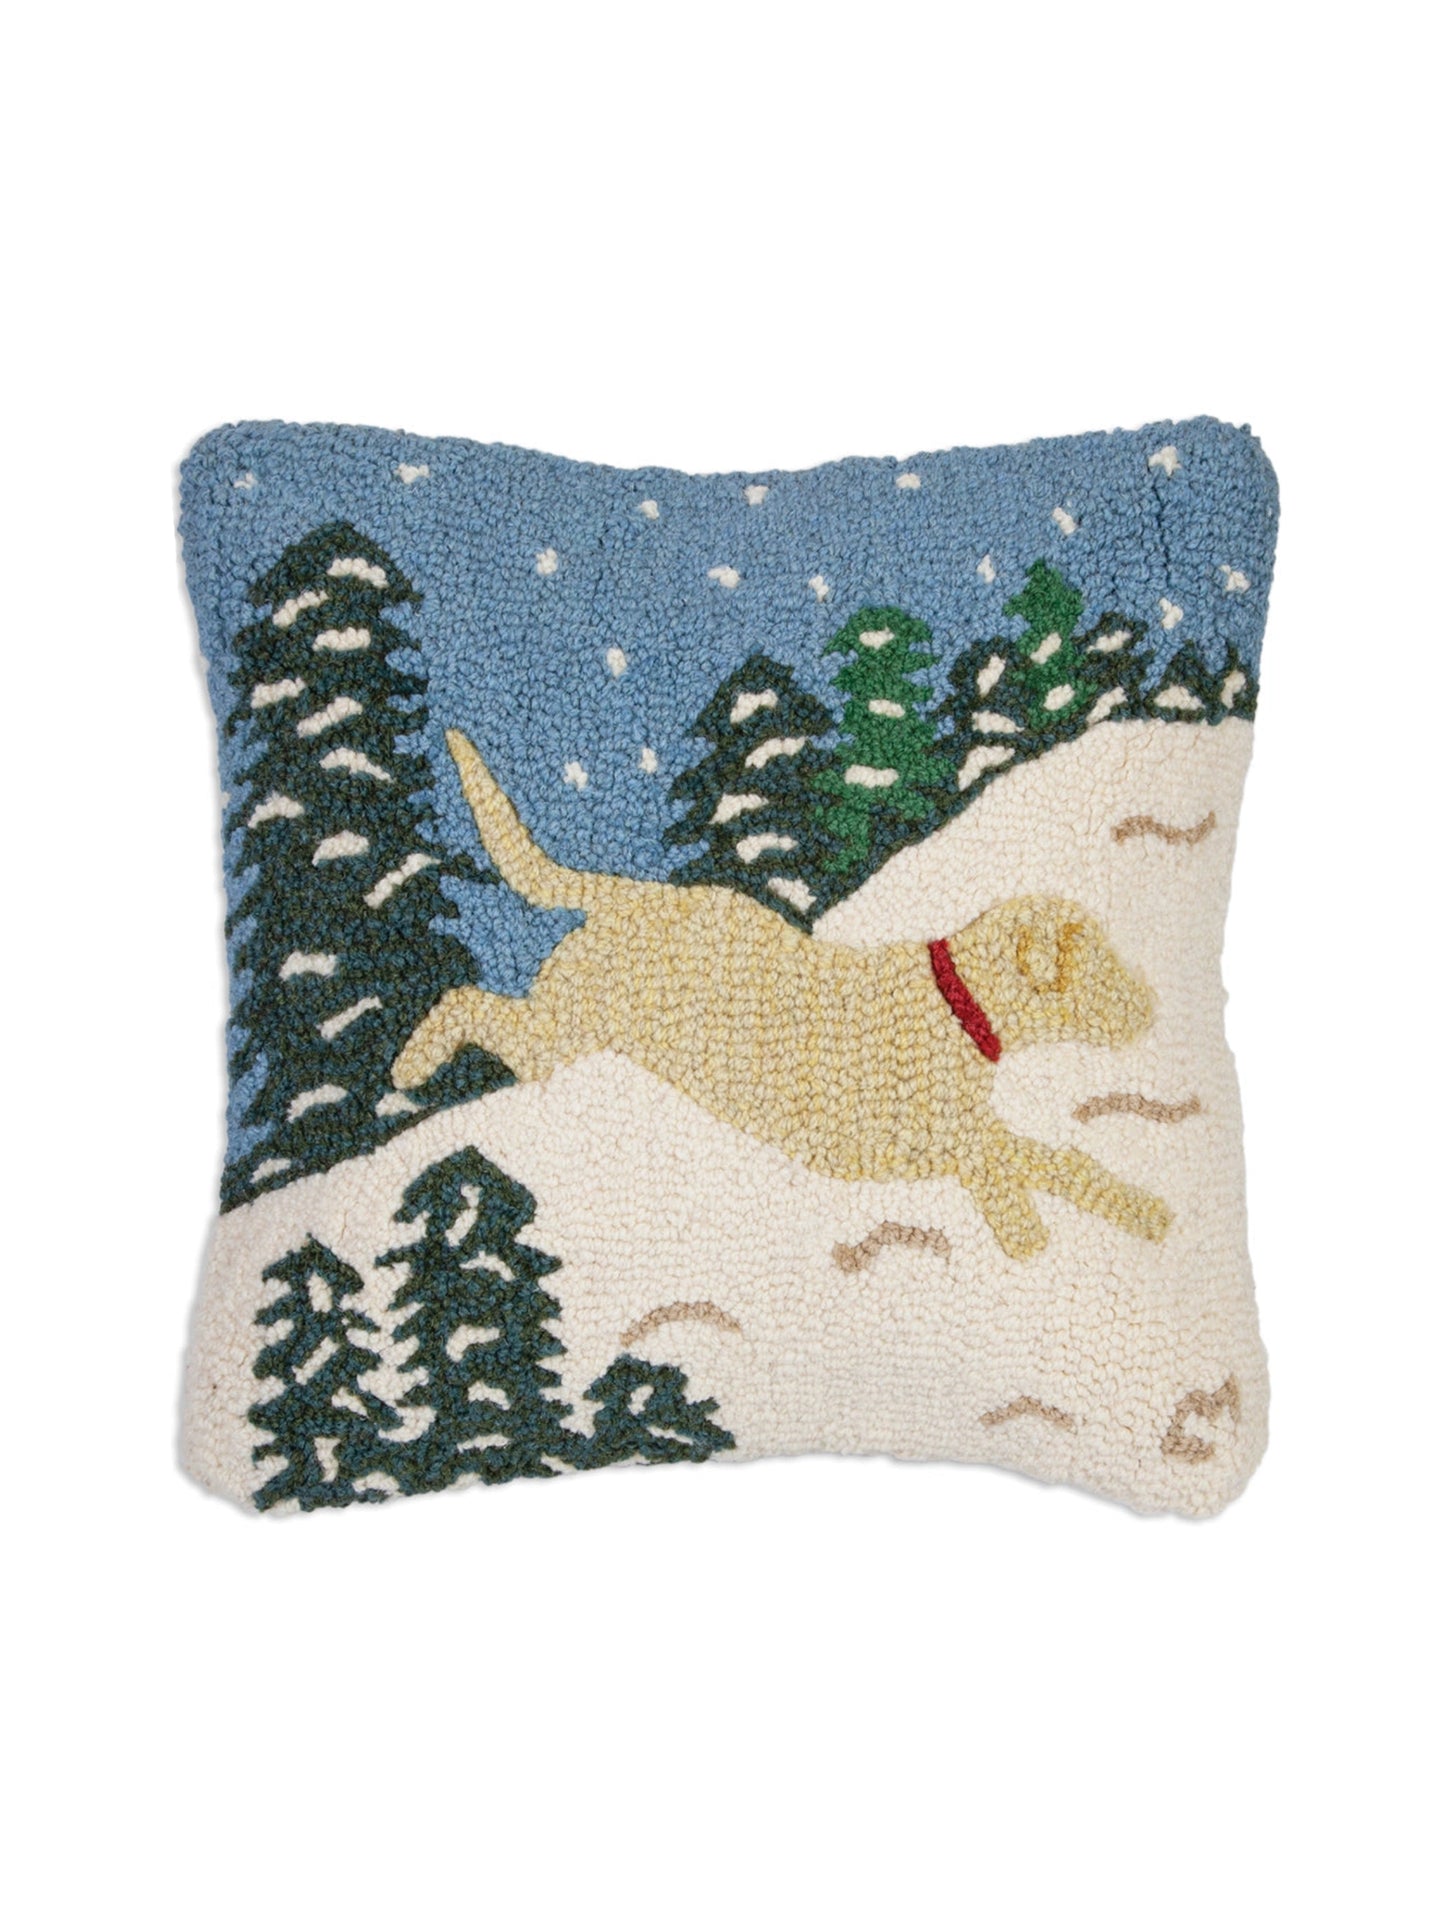 Yellow Lab Snow Dog Hooked Wool Pillow Weston Table